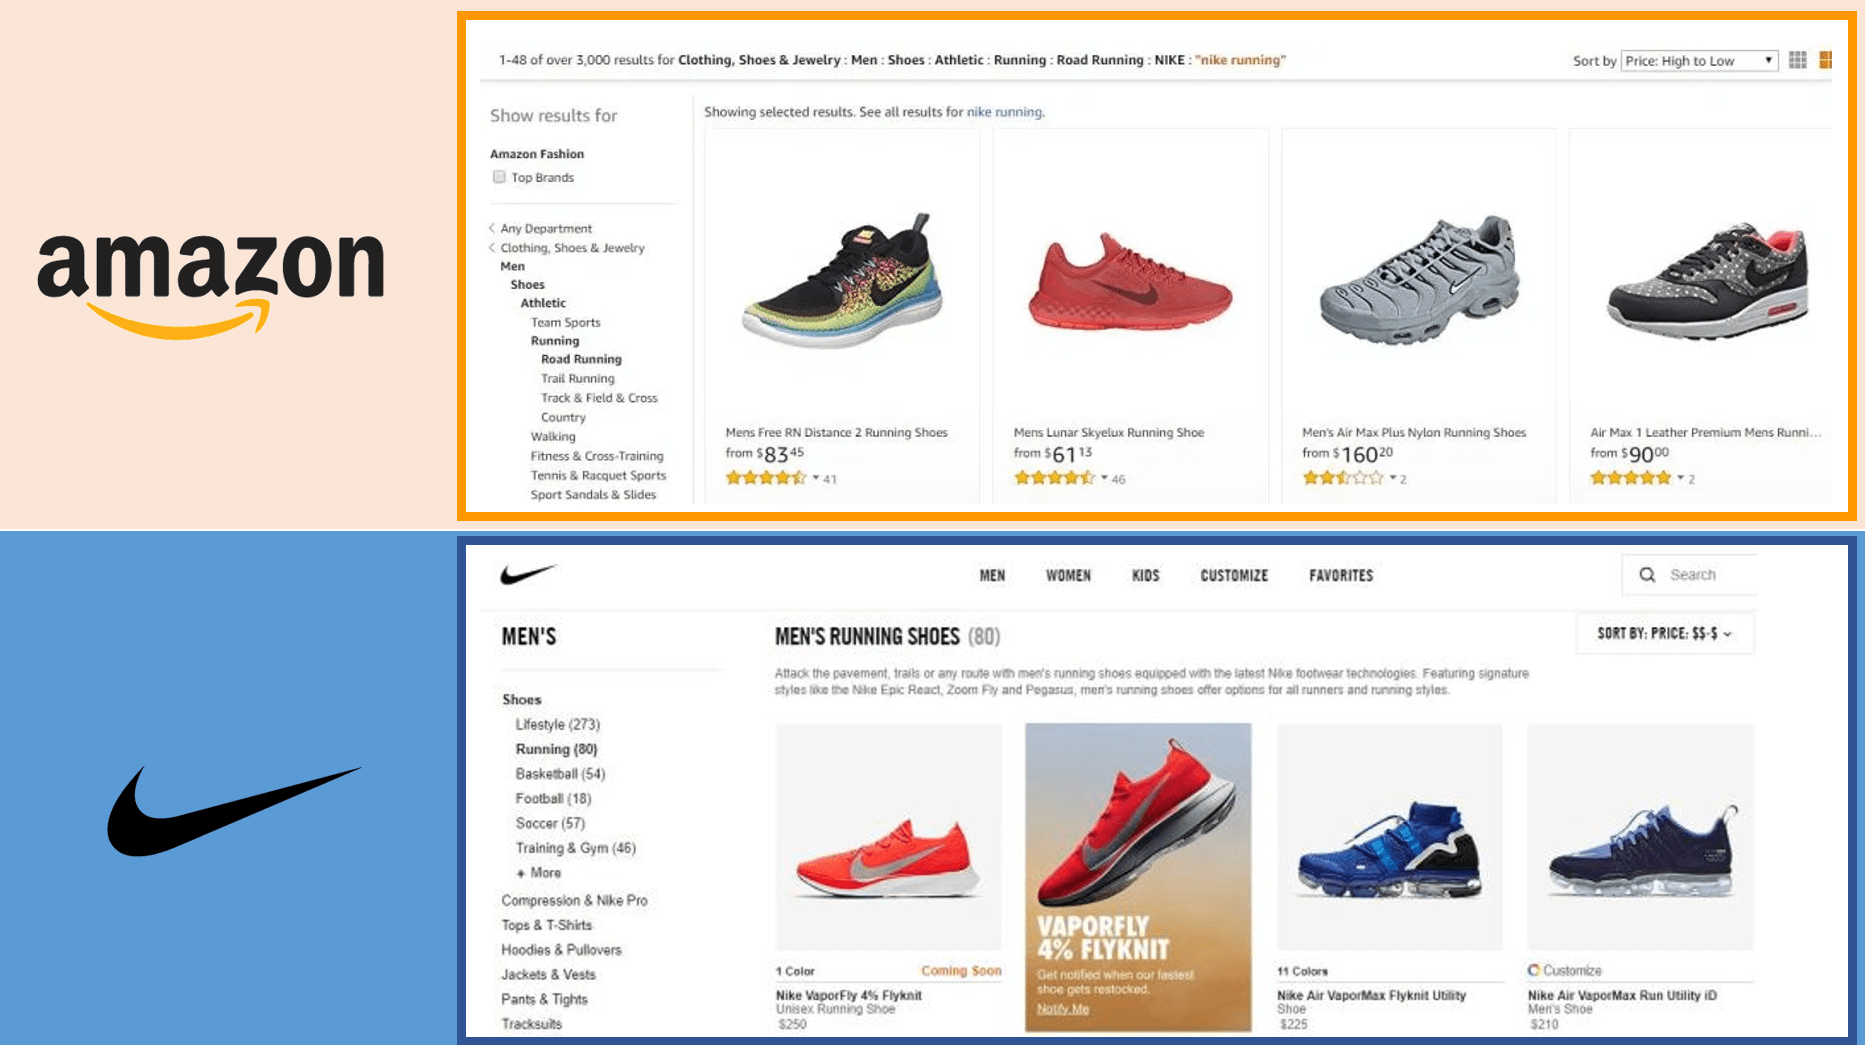 Why Nike and Amazon are breaking up – The Fashion Retailer